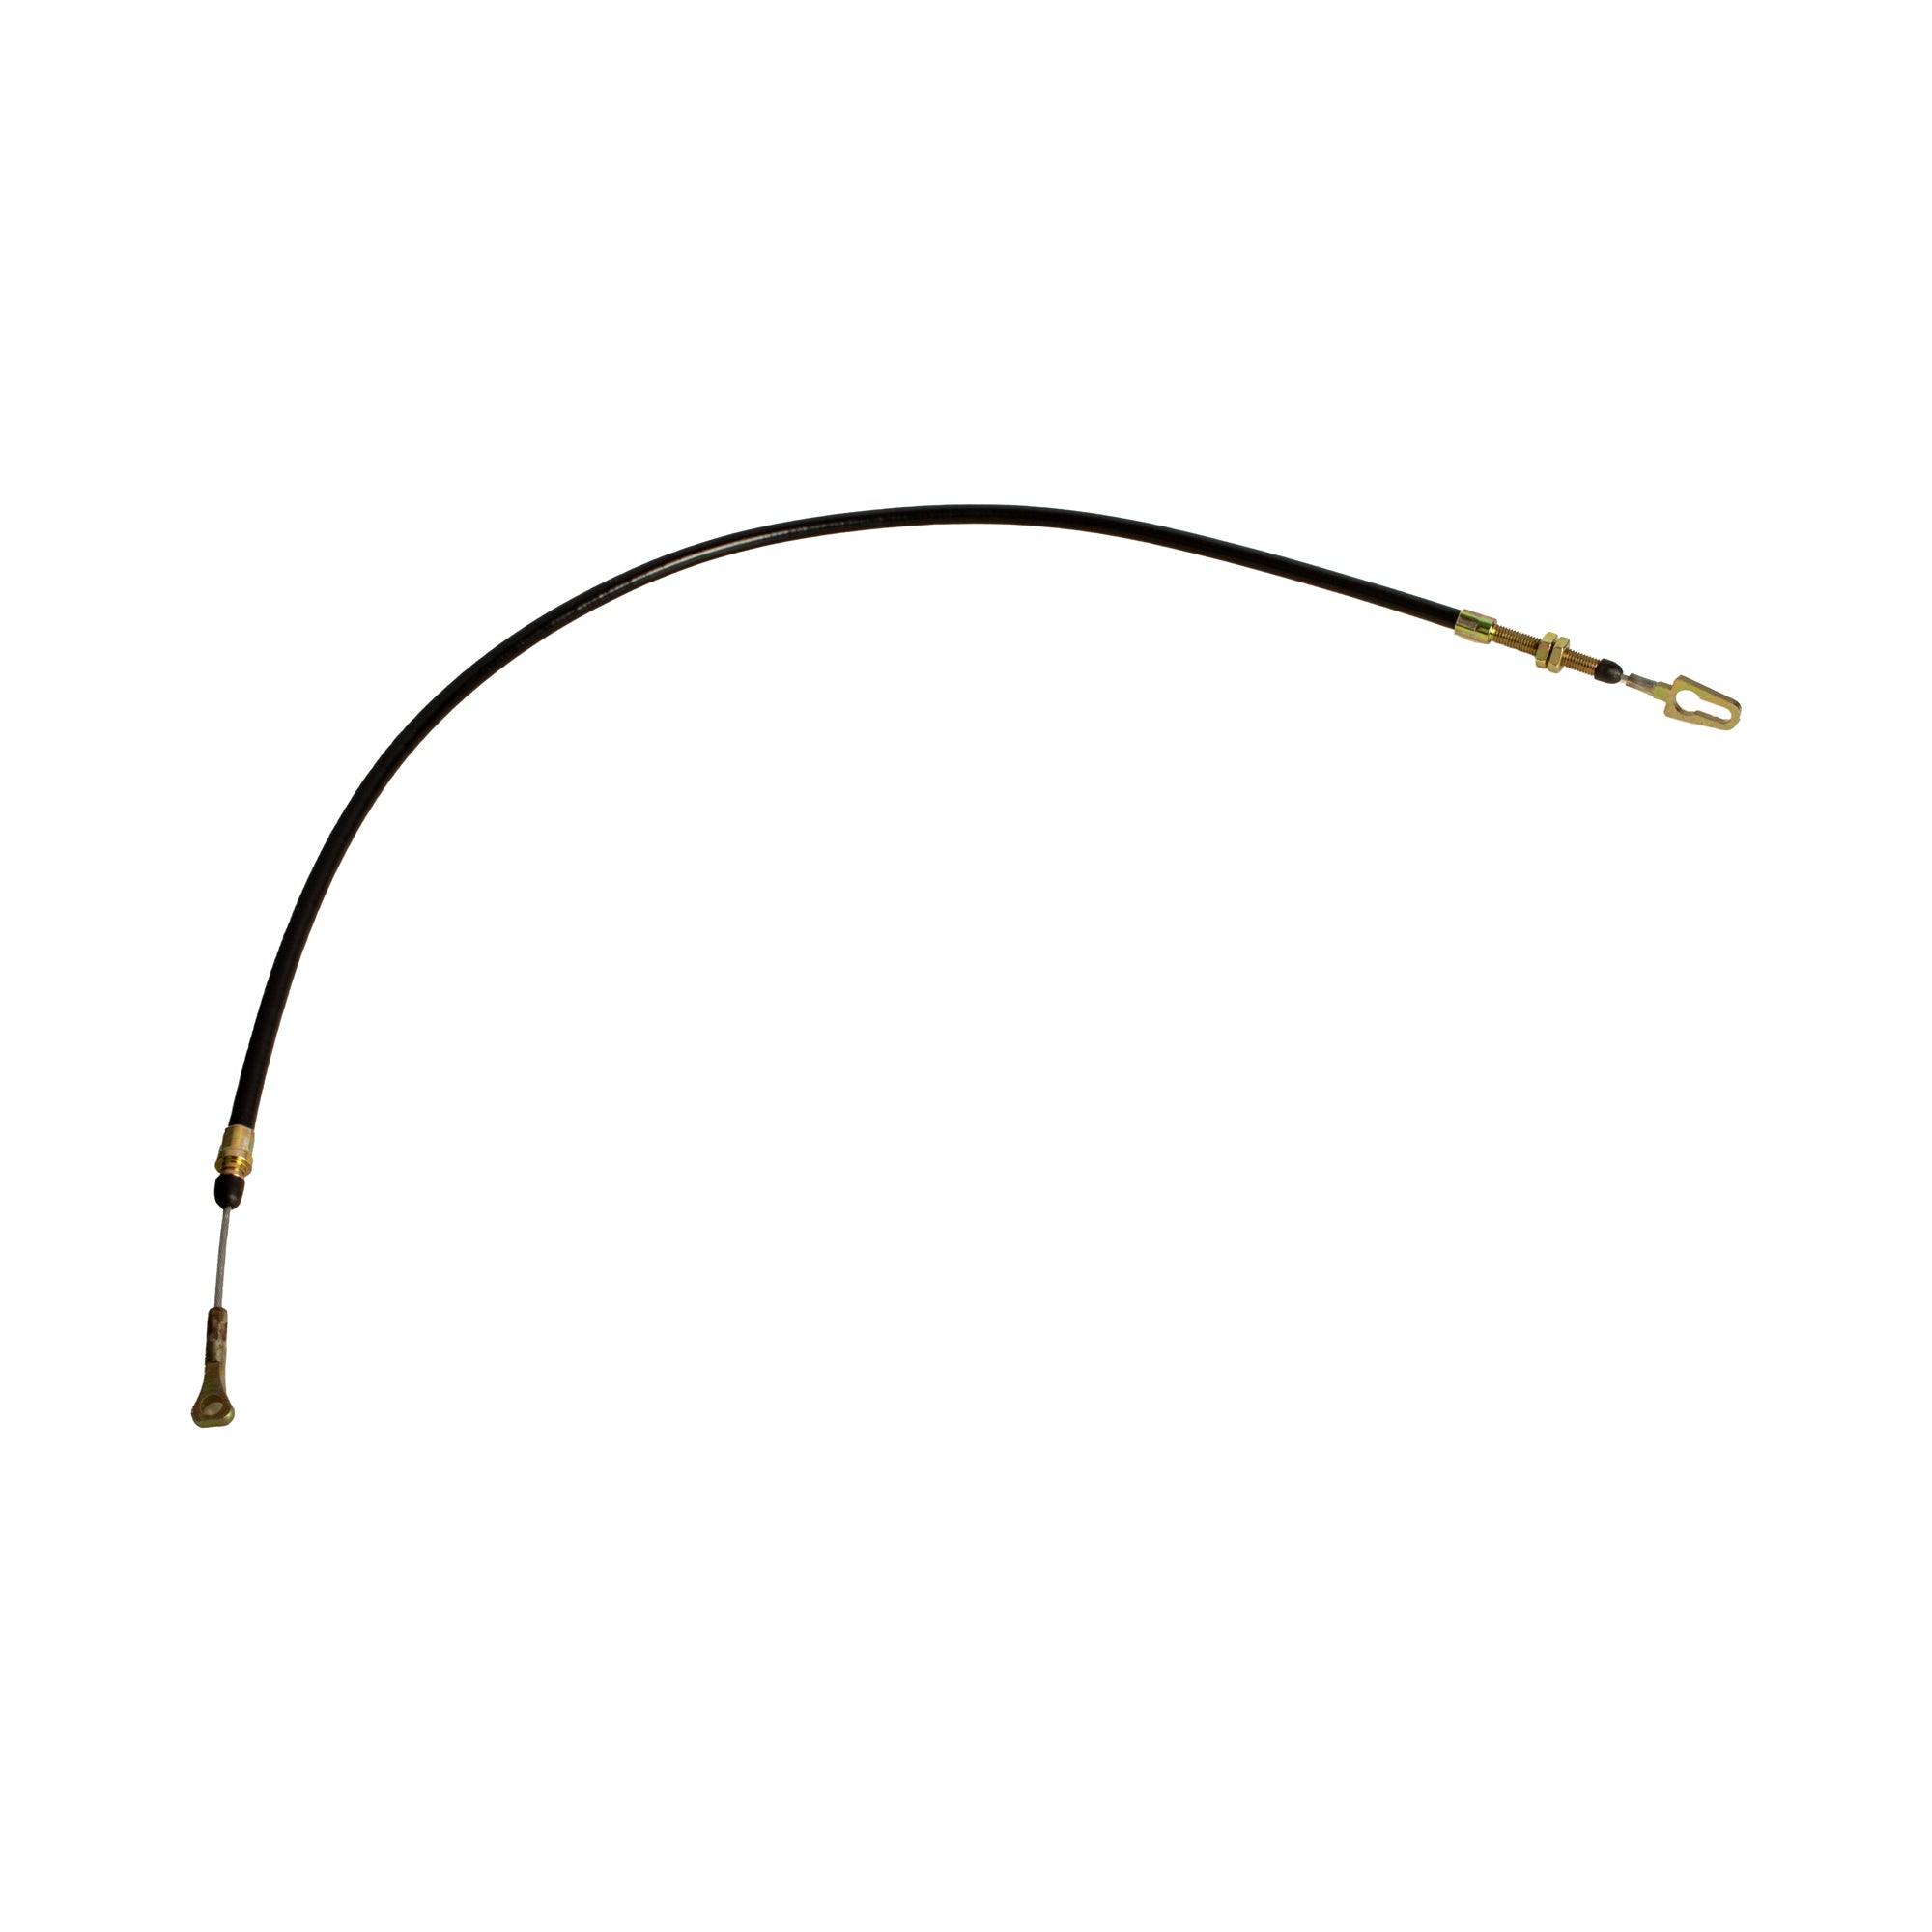 Hand Brake Cable Replacement for MASSEY FERGUSON Tractor 342 375 398 3596772M92